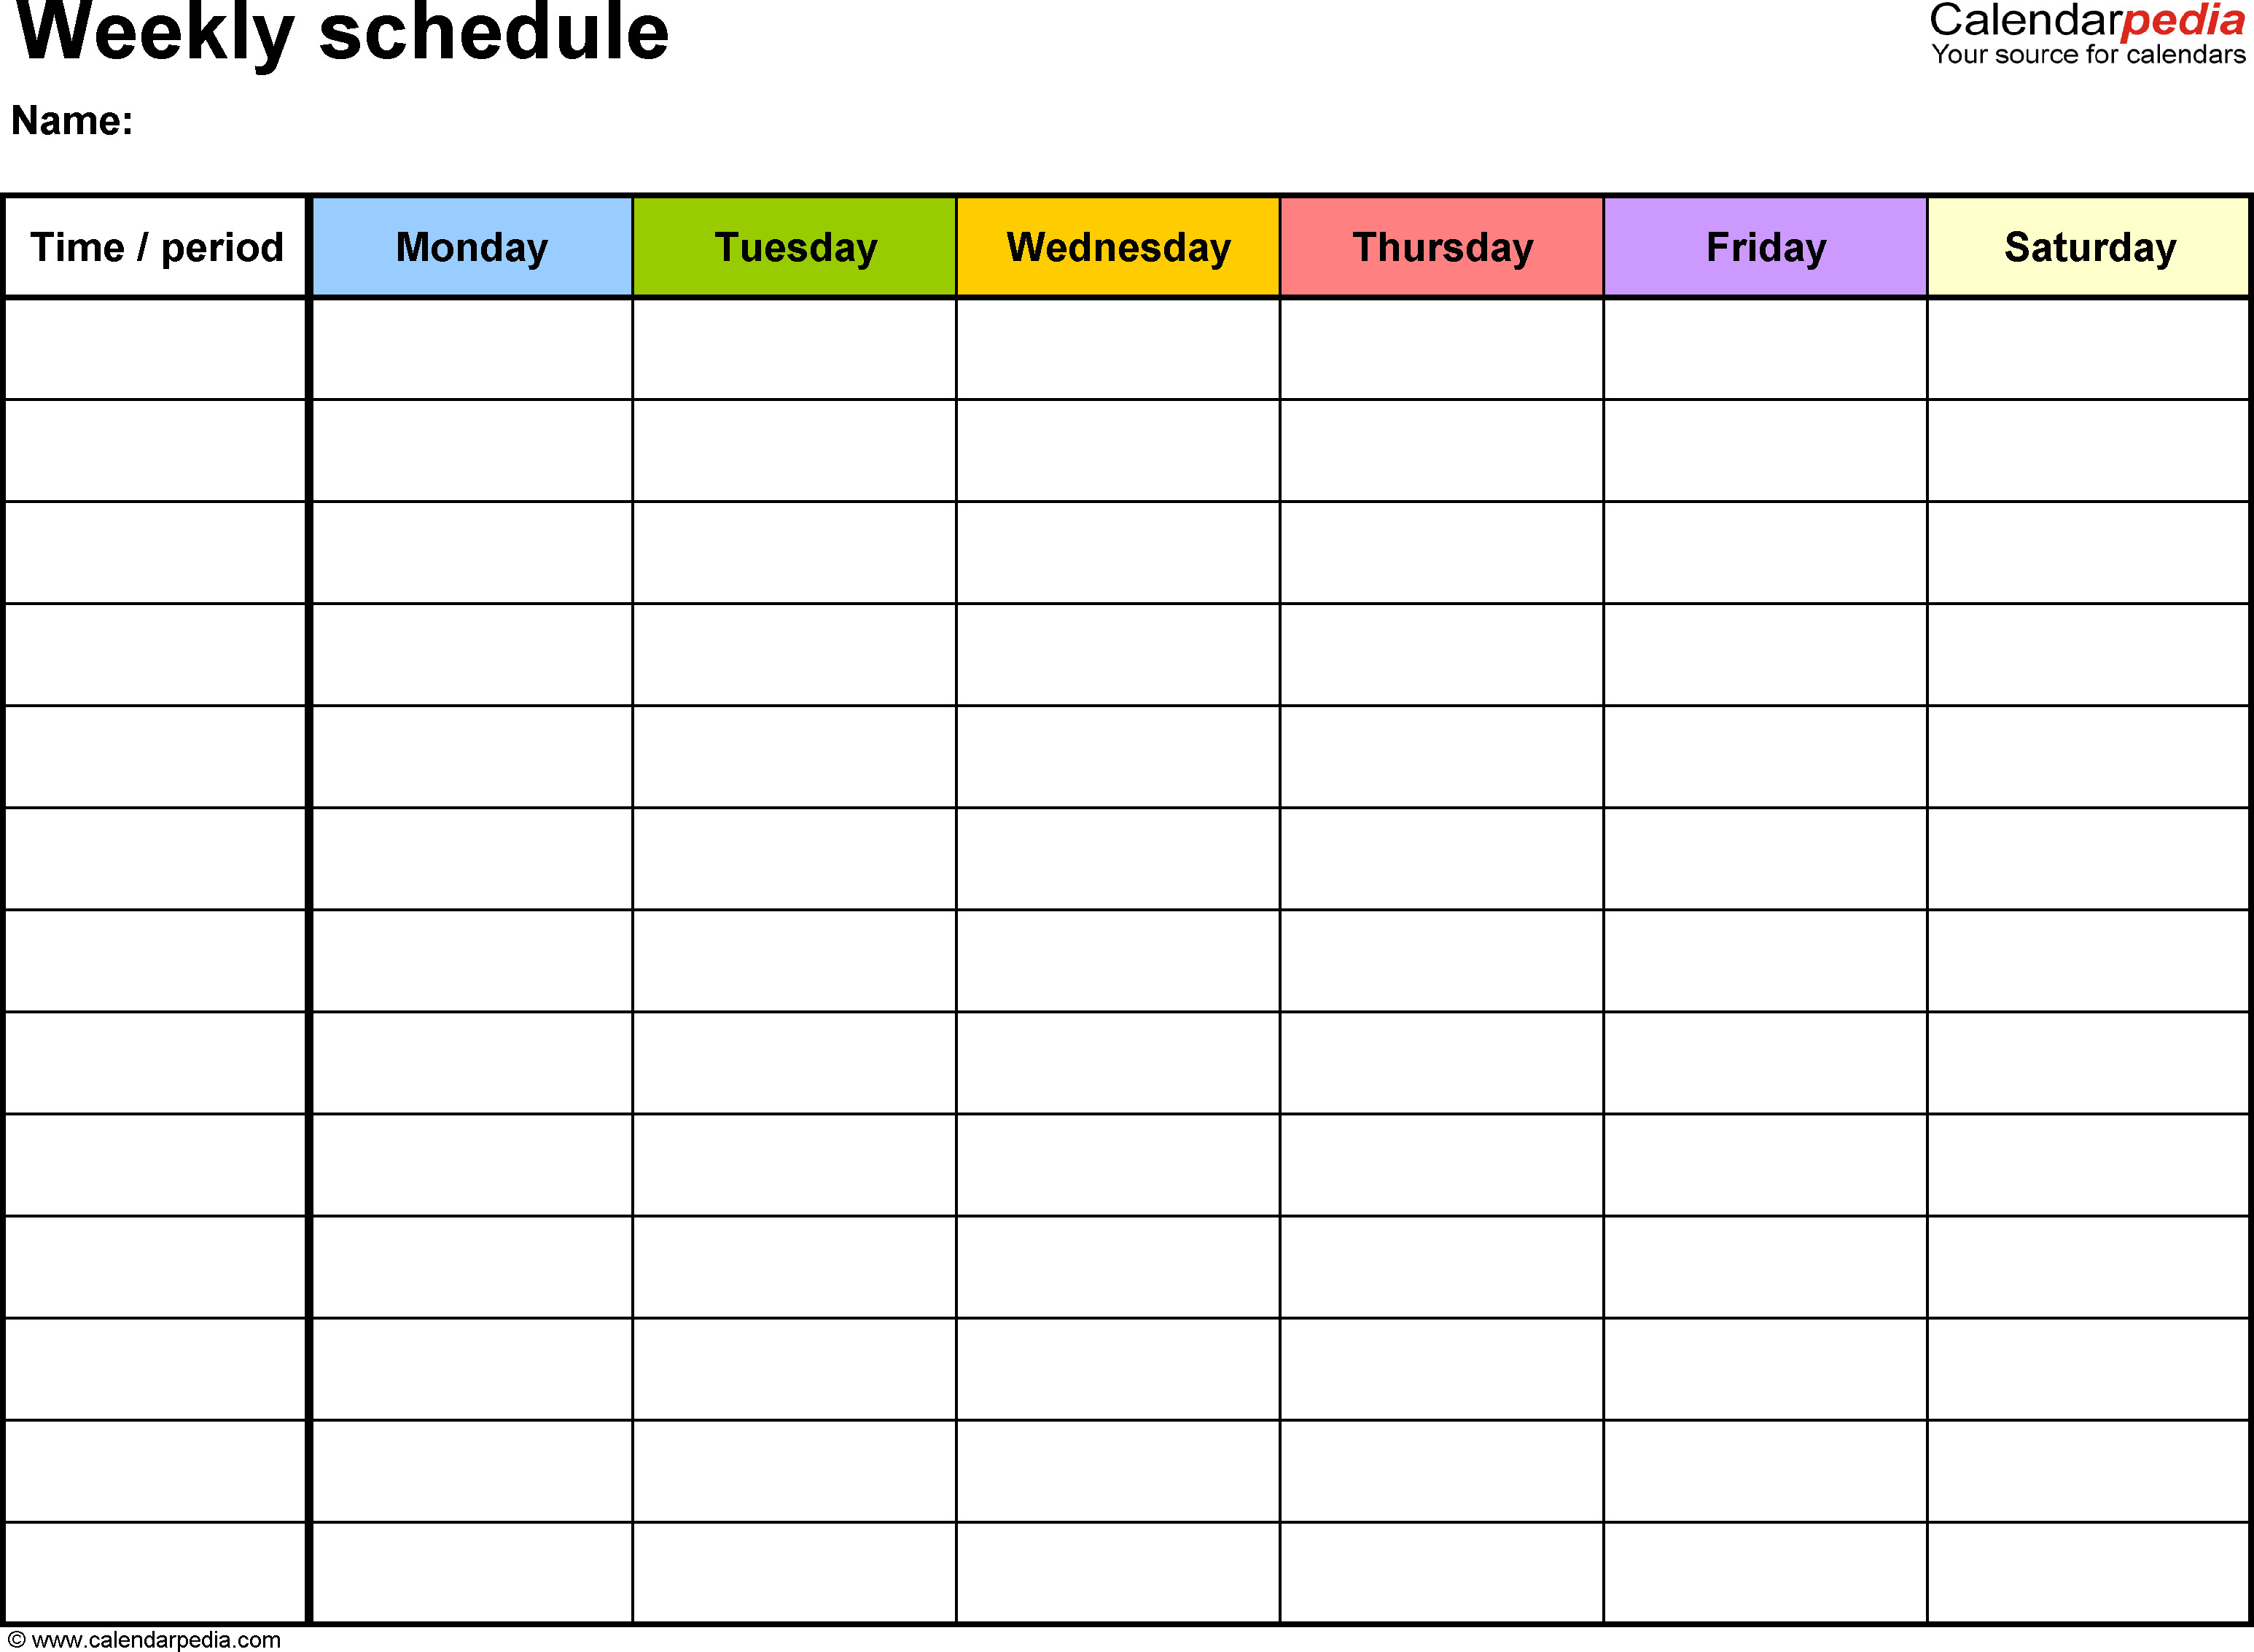 Weekly Time Schedule Template Free Weekly Schedule Templates for Word 18 Templates